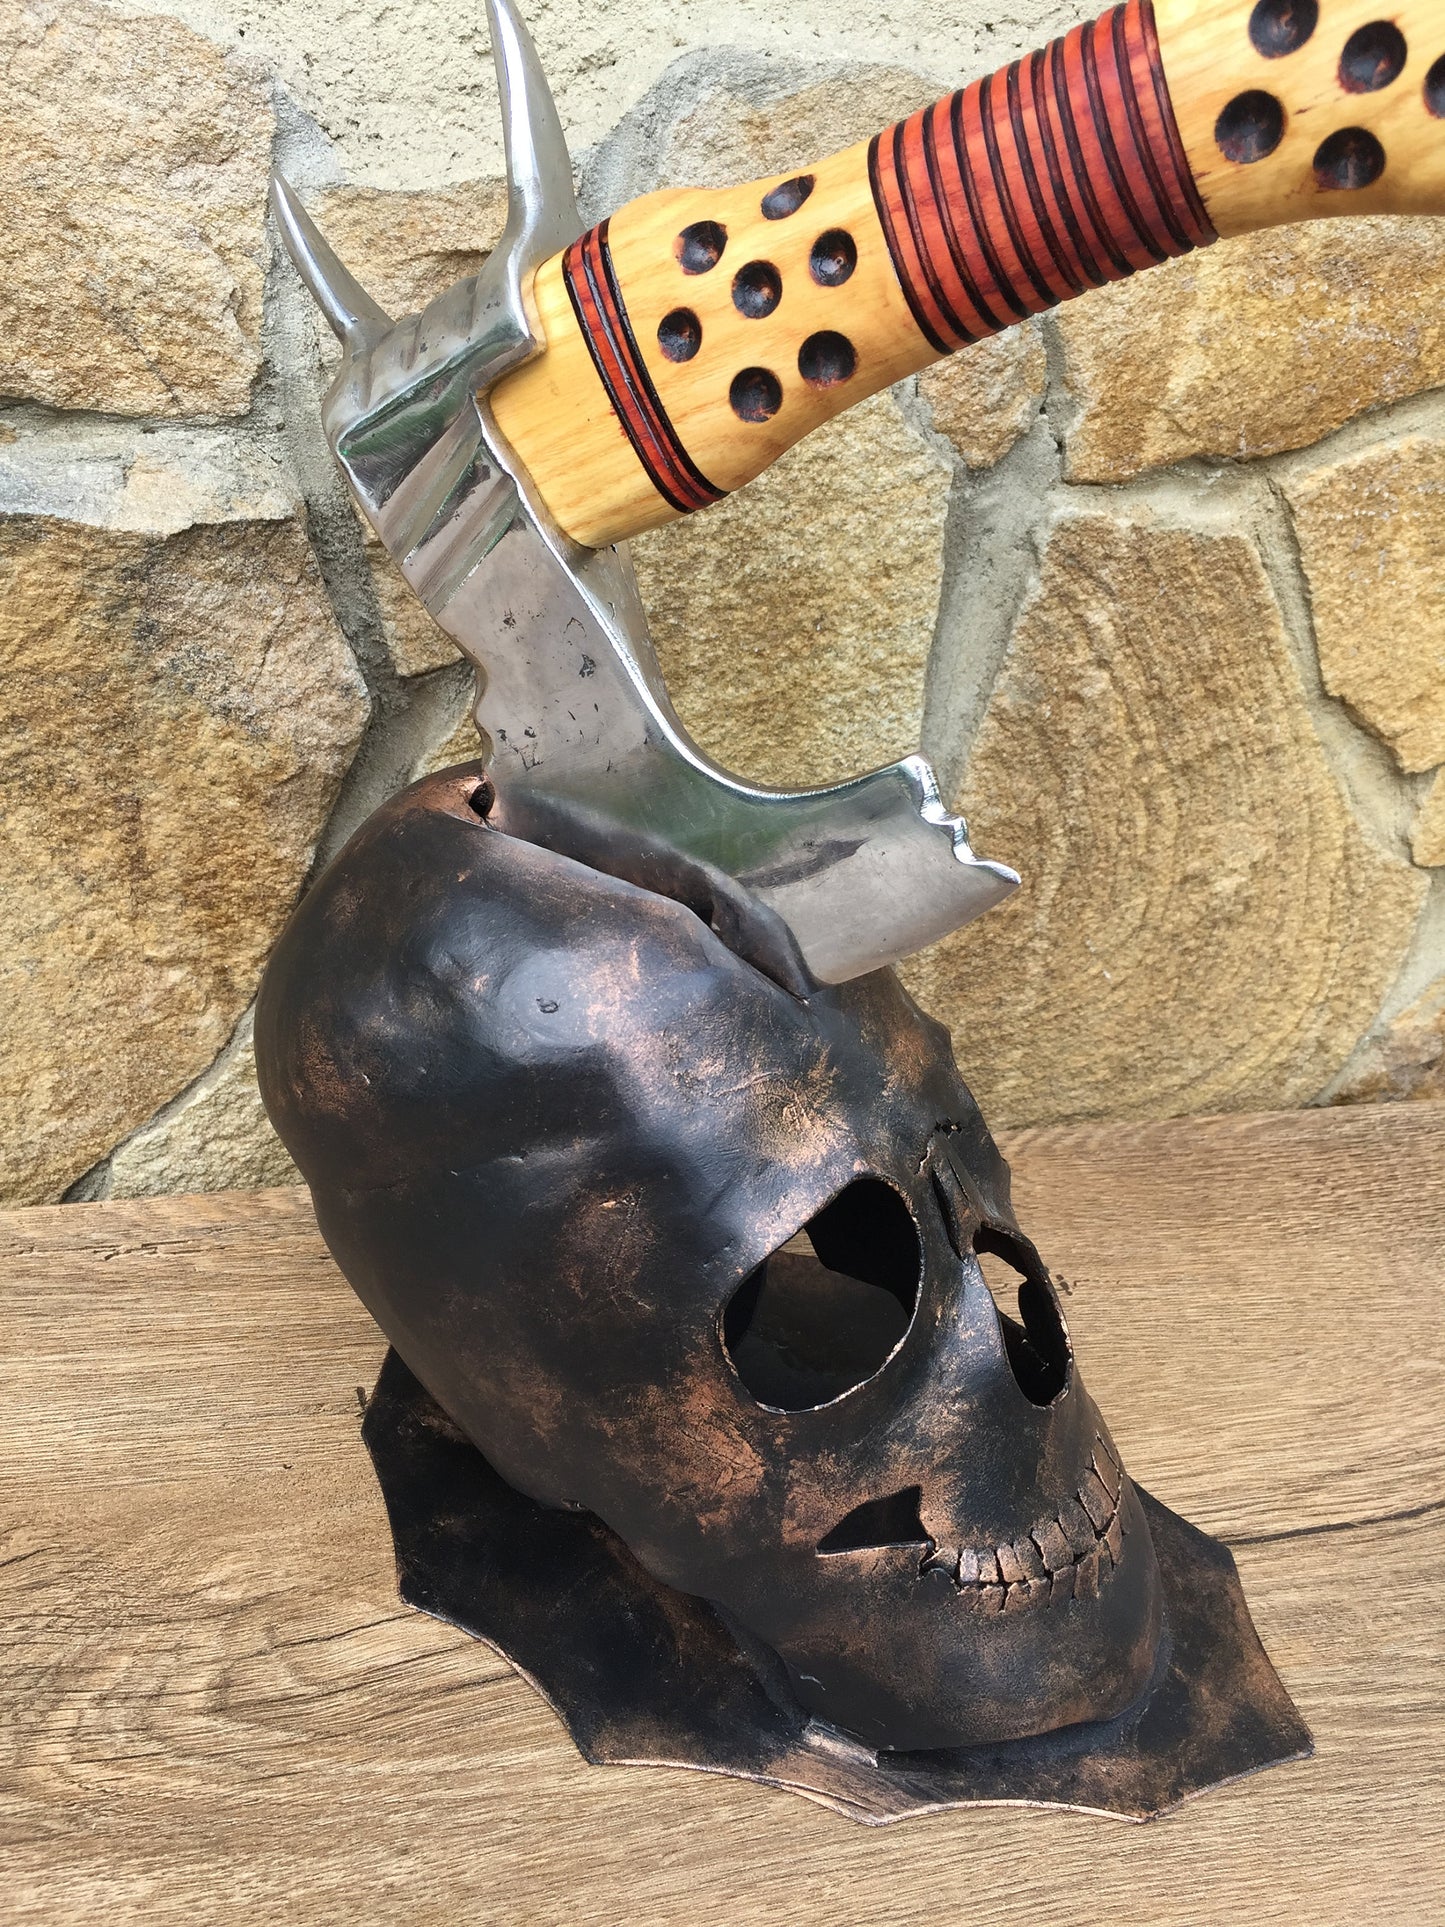 Axe holder, axe stand, viking axe, Leviathan axe, mens gifts, God of War axe, iron skull, medieval axe, tomahawk, gift for him,gifts for men